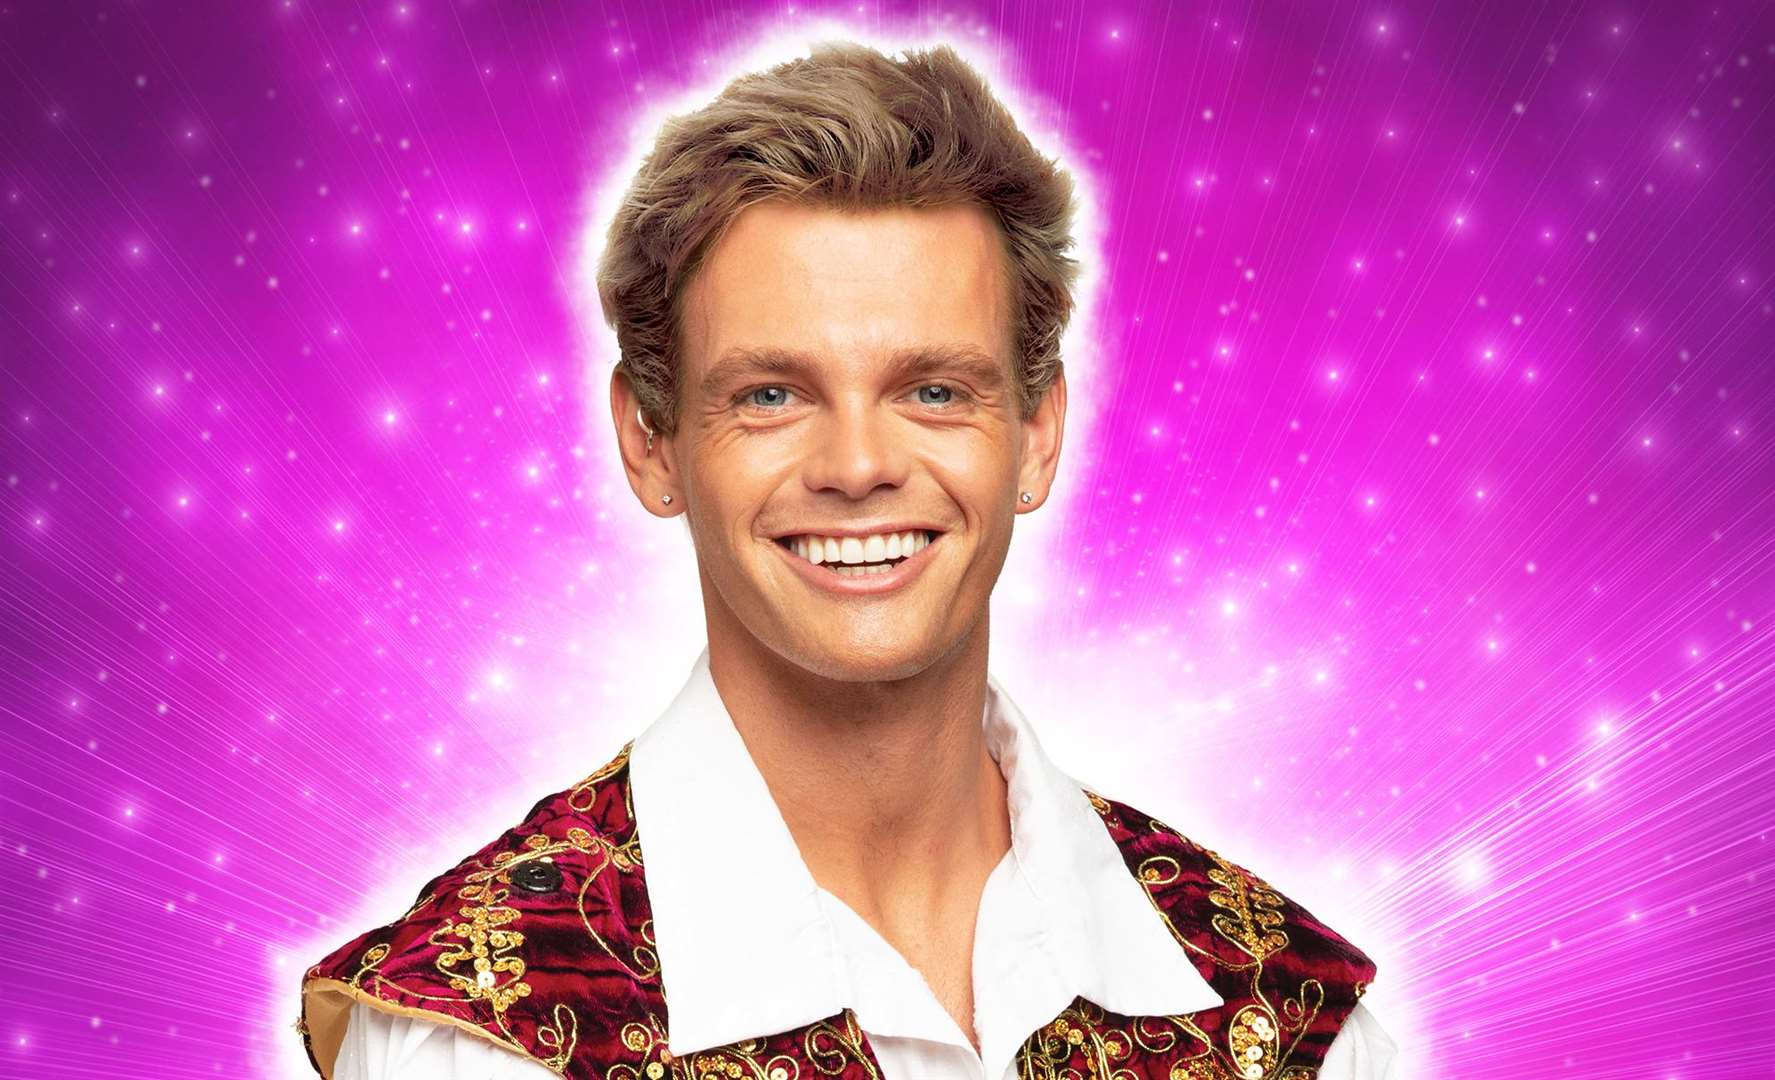 Dancing On Ice champion Regan Gascoigne will play Dandini at the Orchard this Christmas